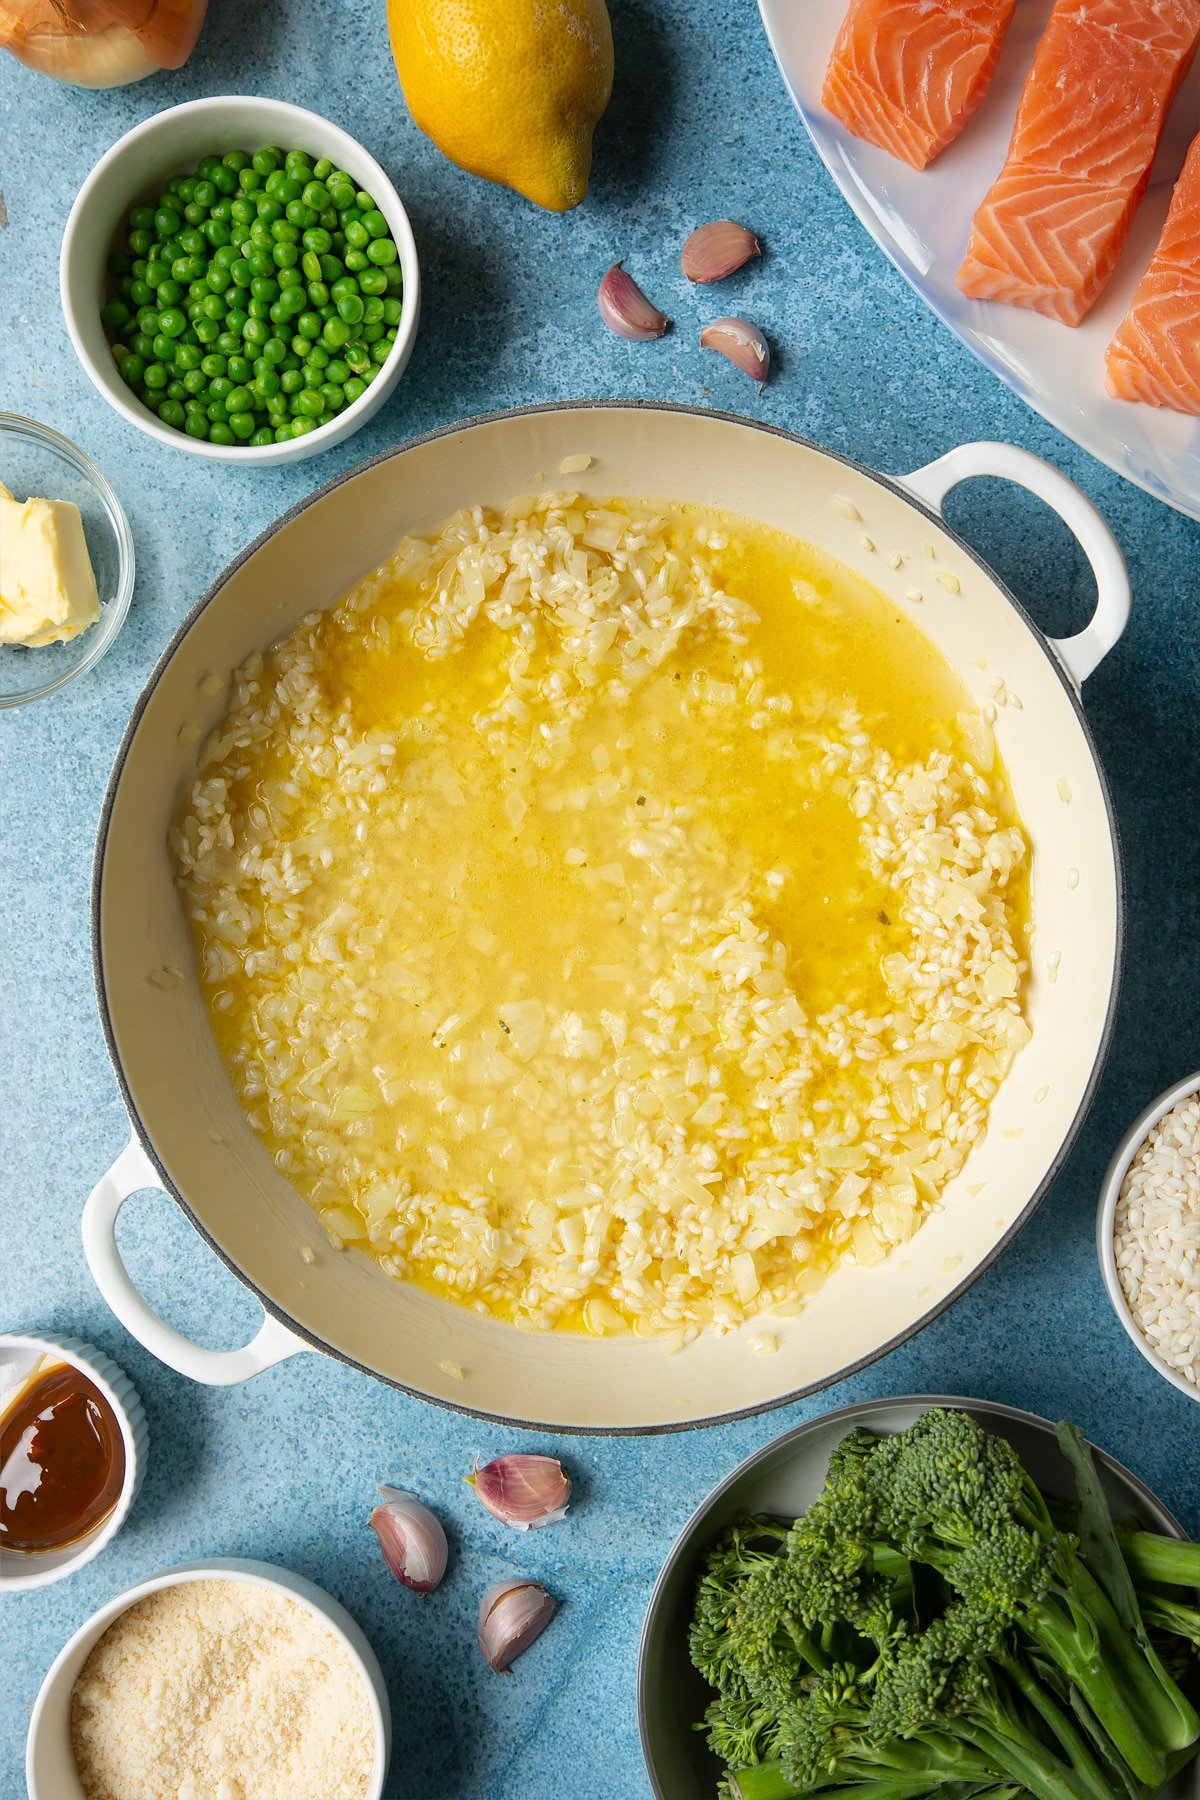 Onions, garlic, butter and arborio rice with stock on top in a large cream-colour pan. Ingredients to make salmon risotto surround the pan.